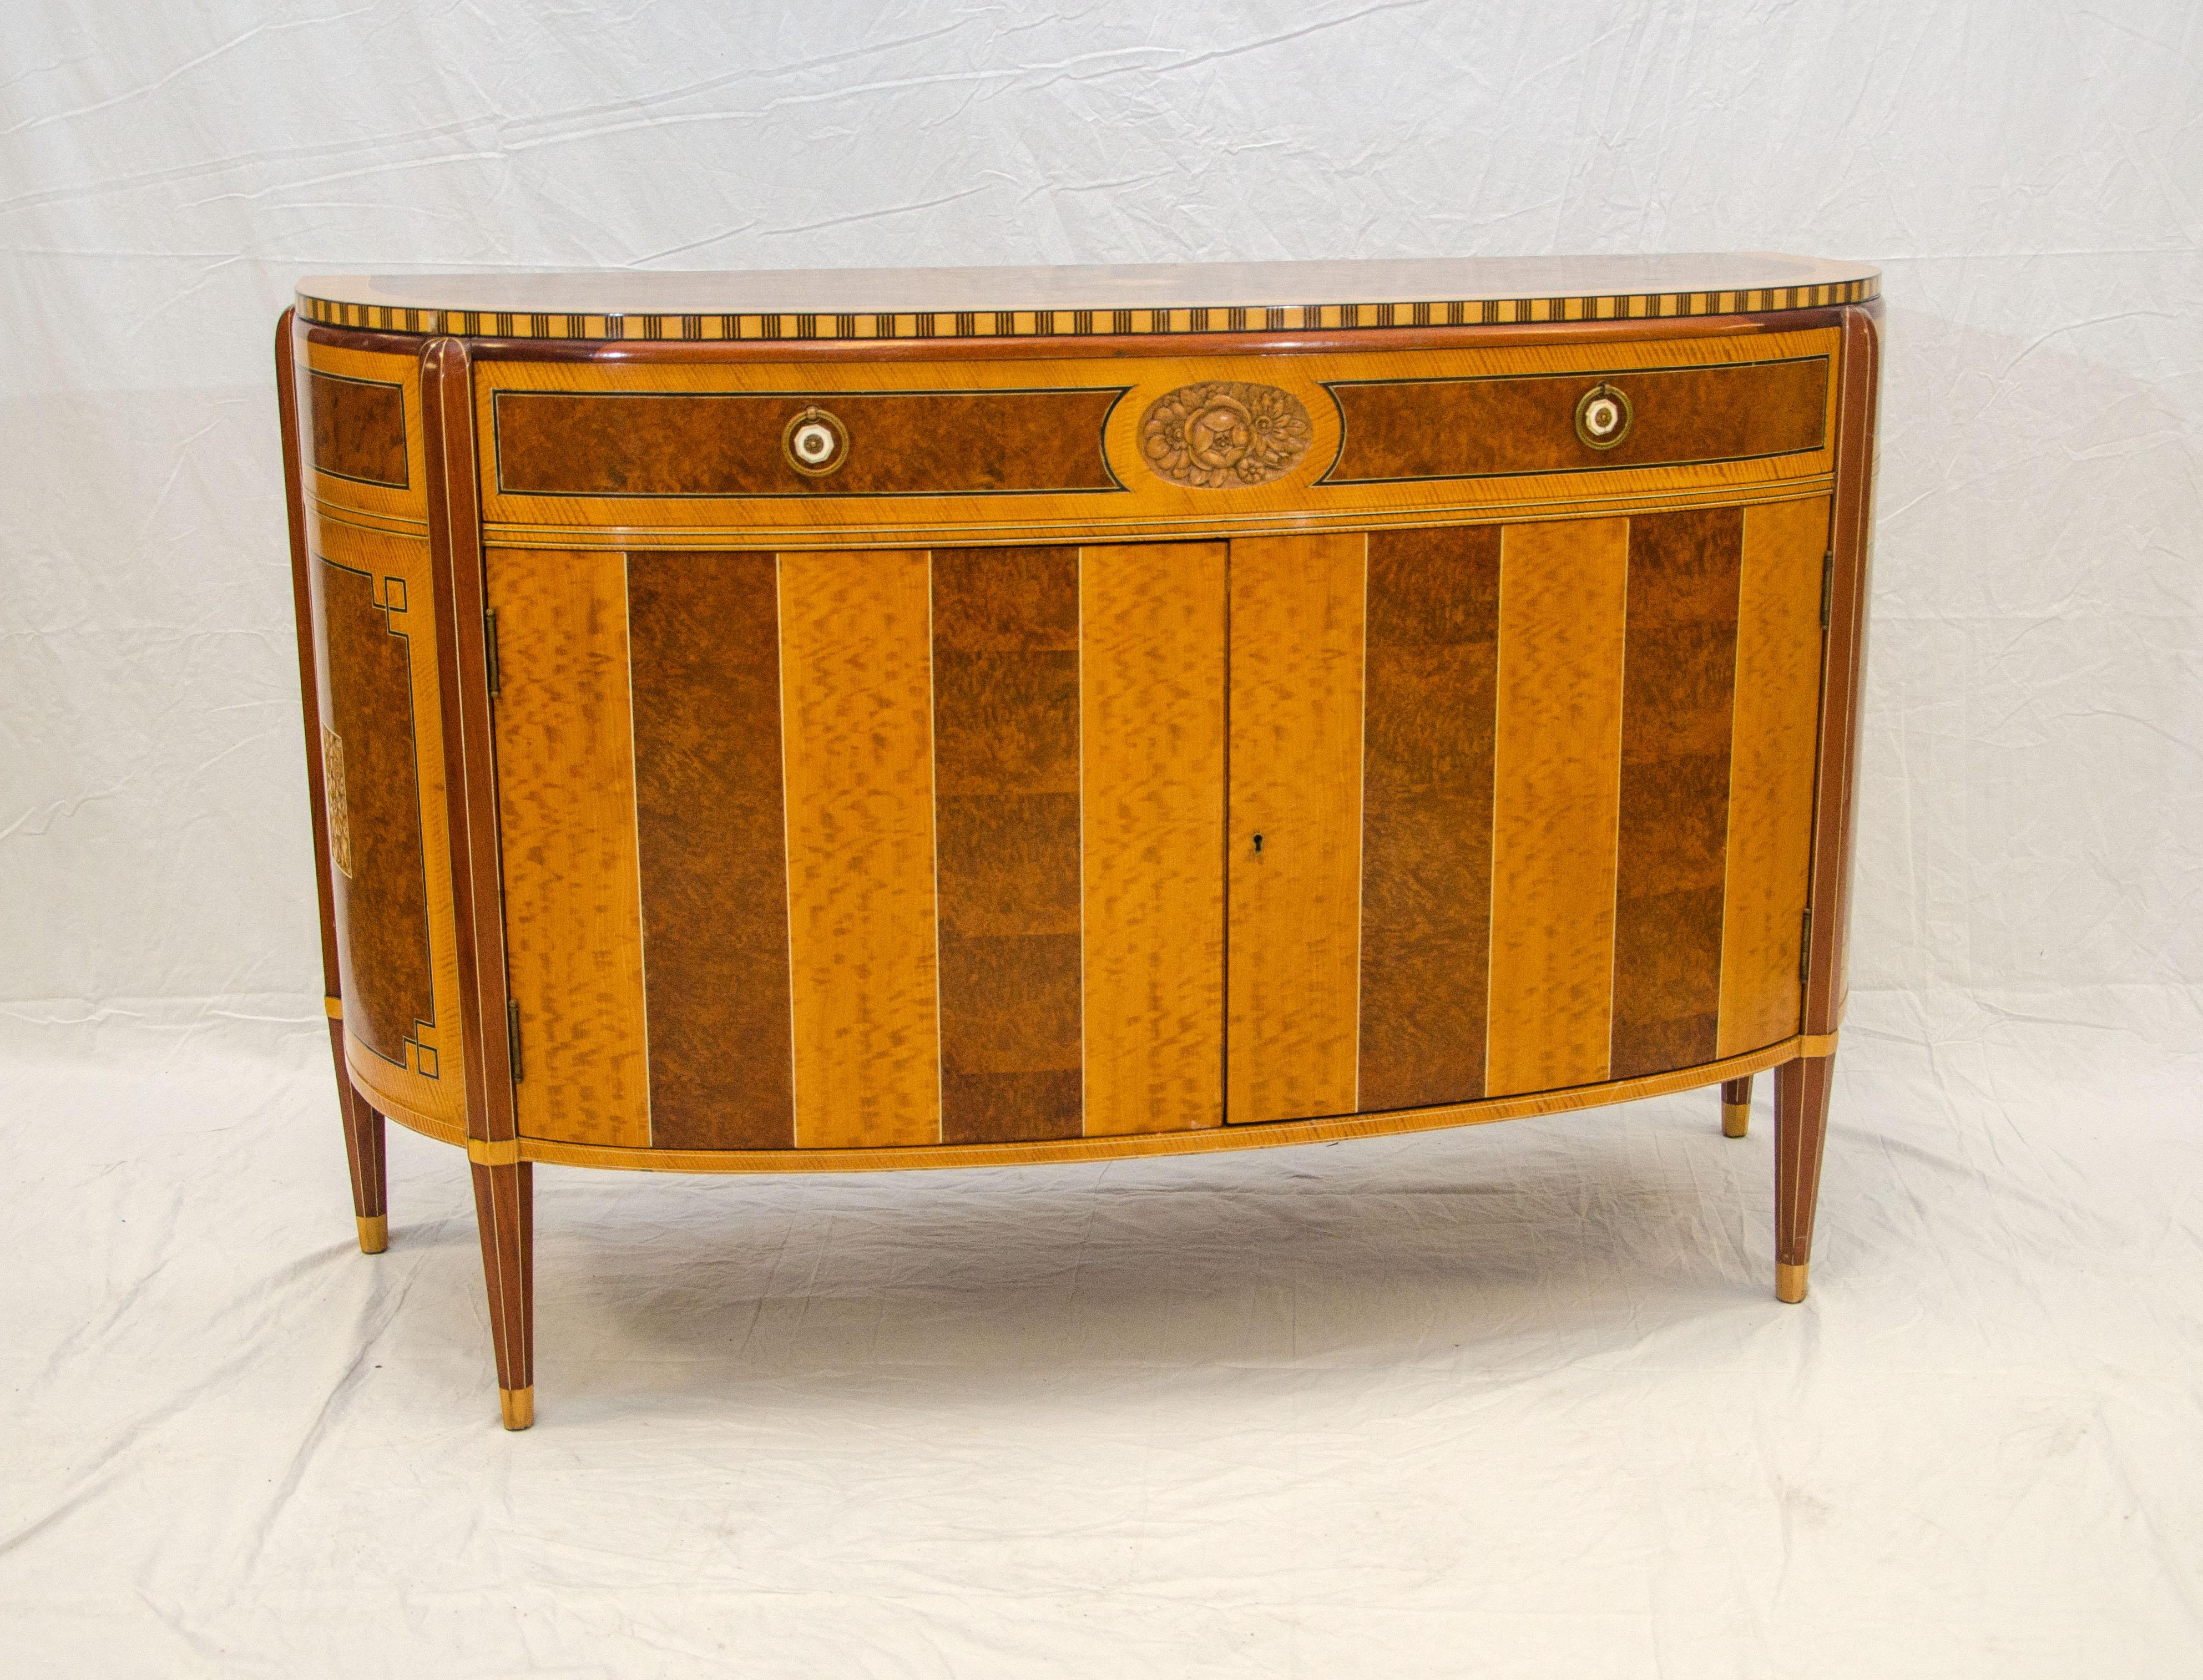 This beautiful dresser was well designed and constructed in a curved demi-lune shape with a French influence, burl walnut, tiger maple, and curly maple accented by ebony and maple stringing inlays throughout, also accented by an Art Deco floral